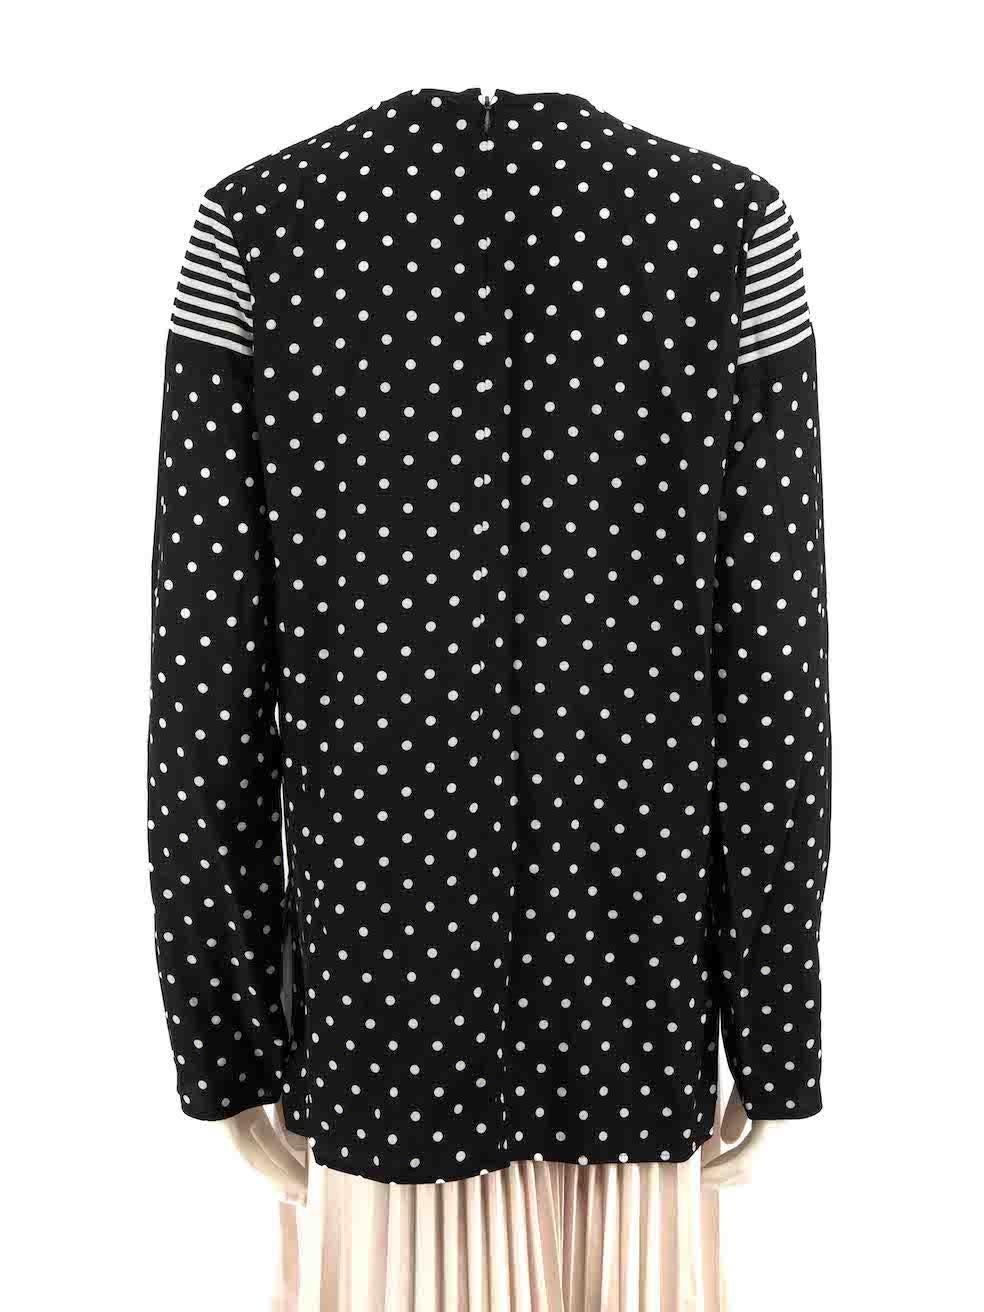 Stella McCartney Black Polkadot & Striped Blouse Size L In Good Condition For Sale In London, GB